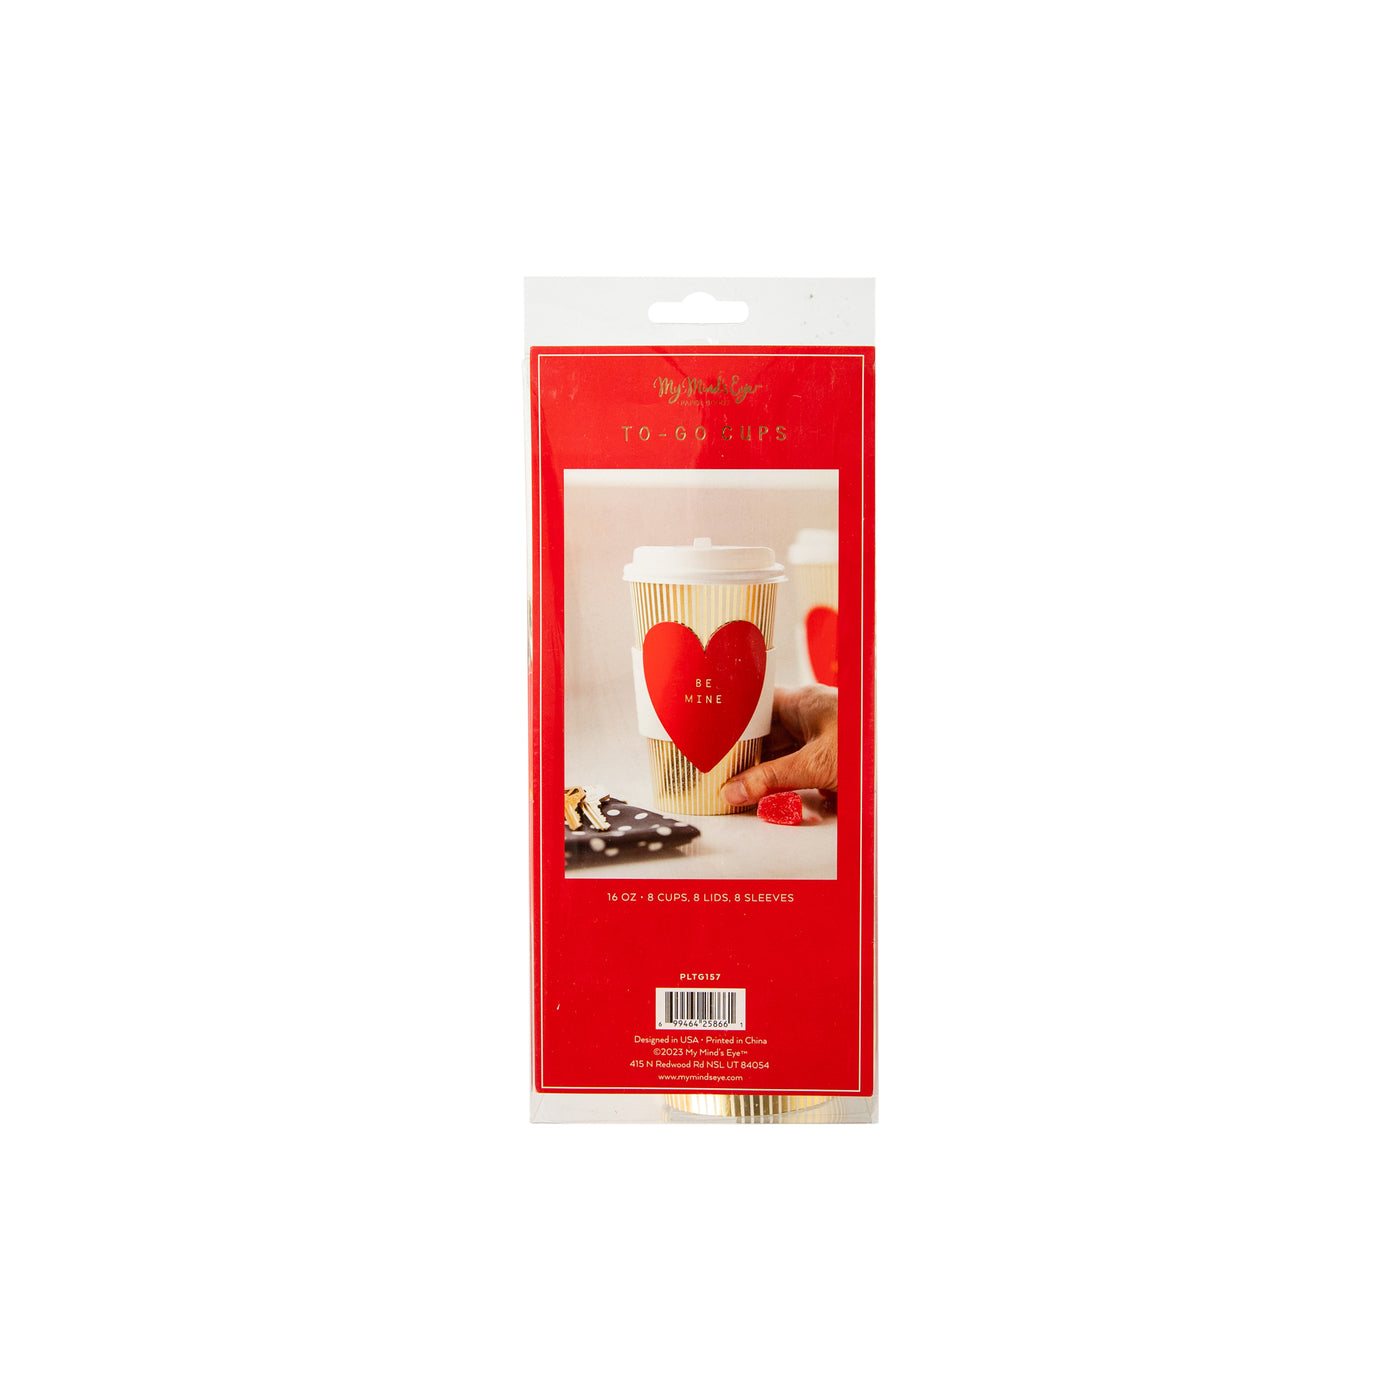 PLTG157 - Red Be Mine Heart To-Go Cups (8 ct)